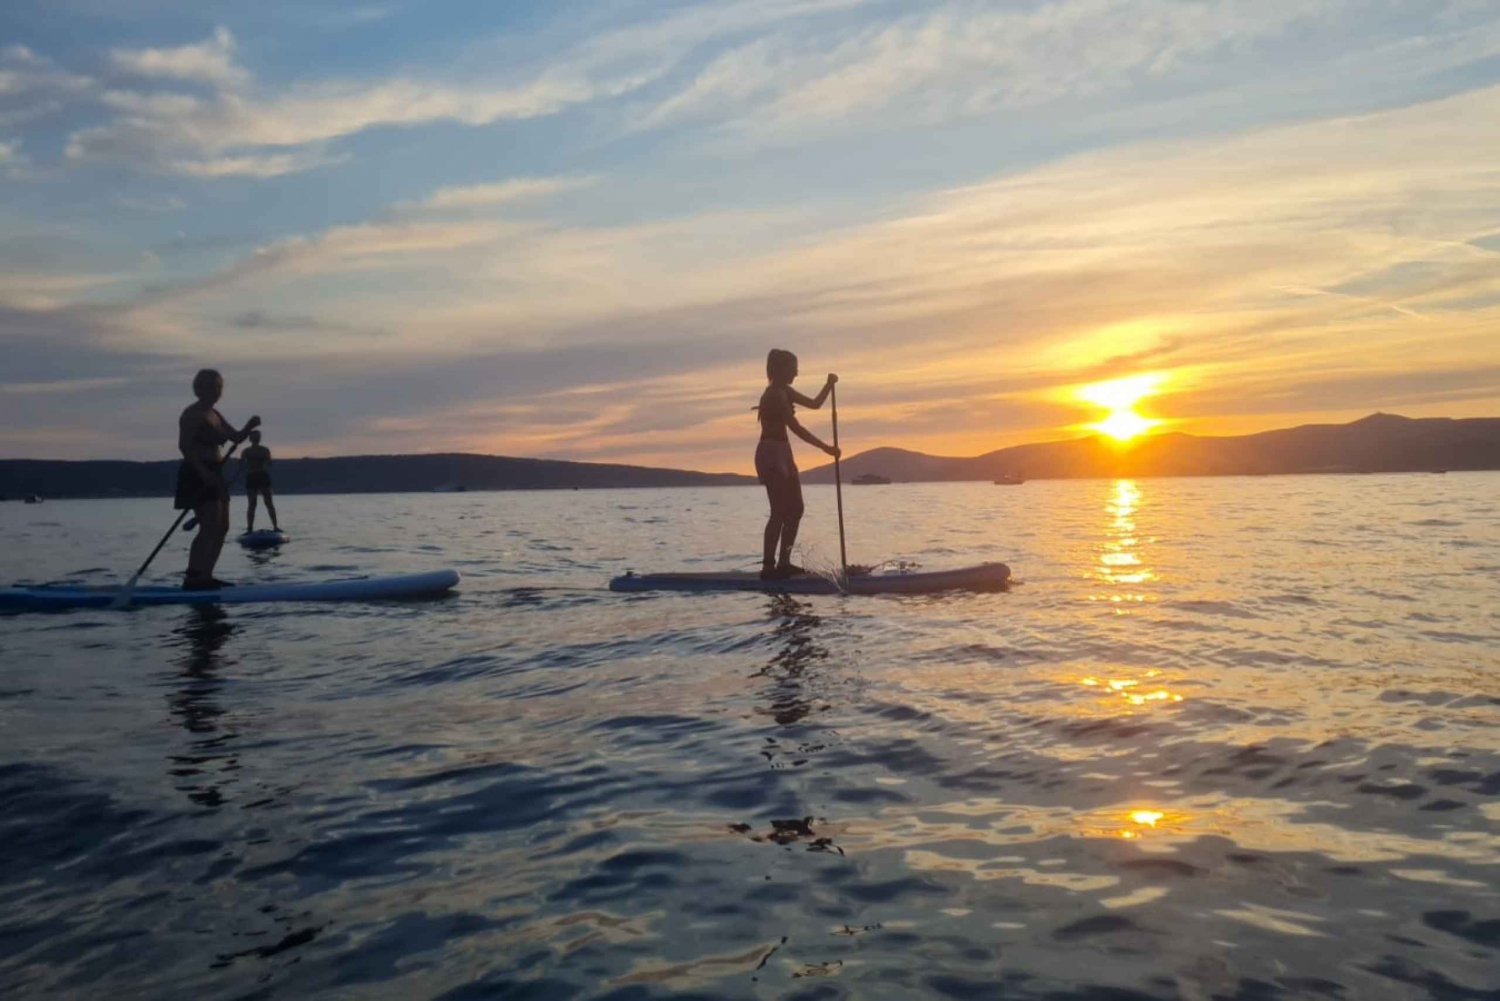 Stand Up Paddle Tour in Split